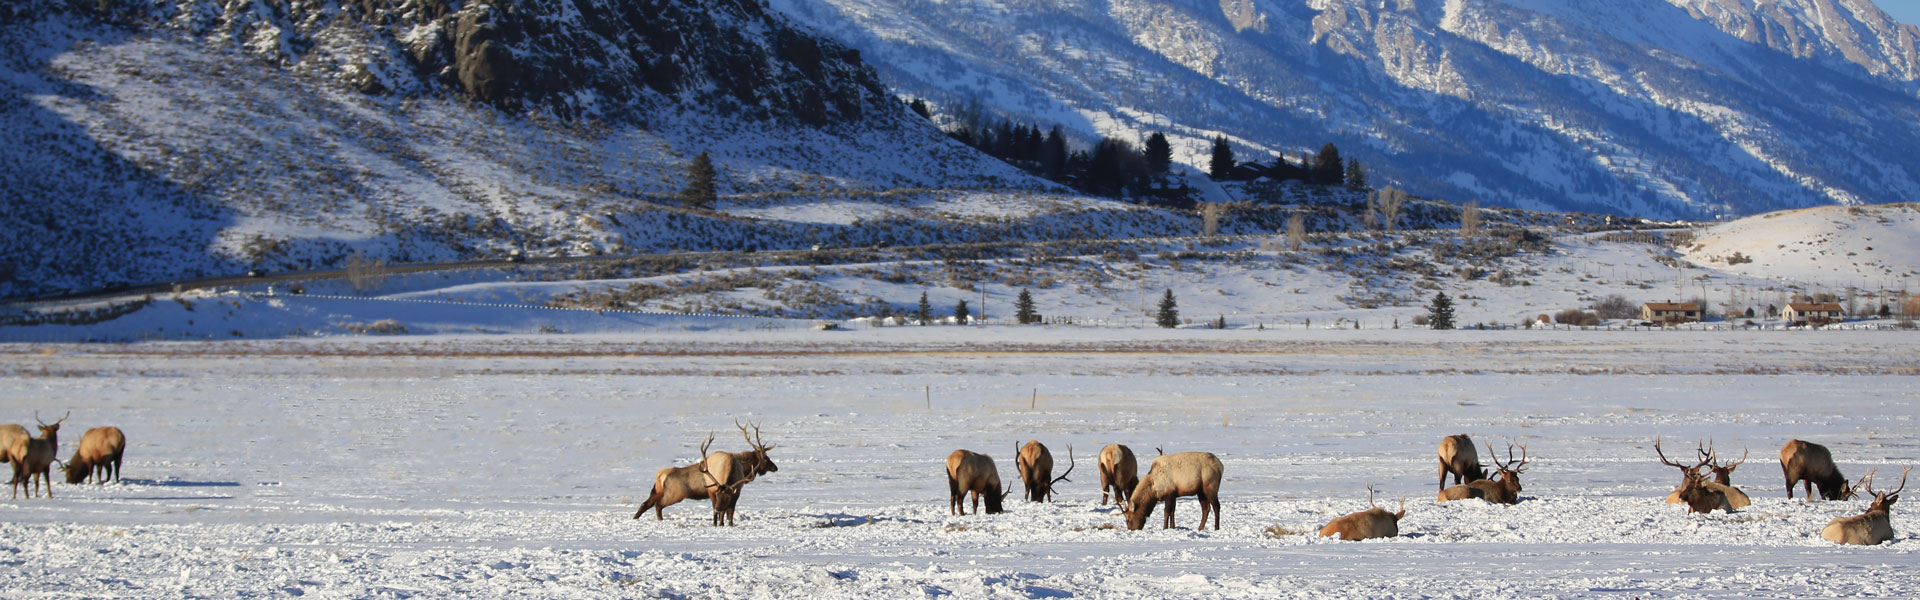 Elk in snow on private land